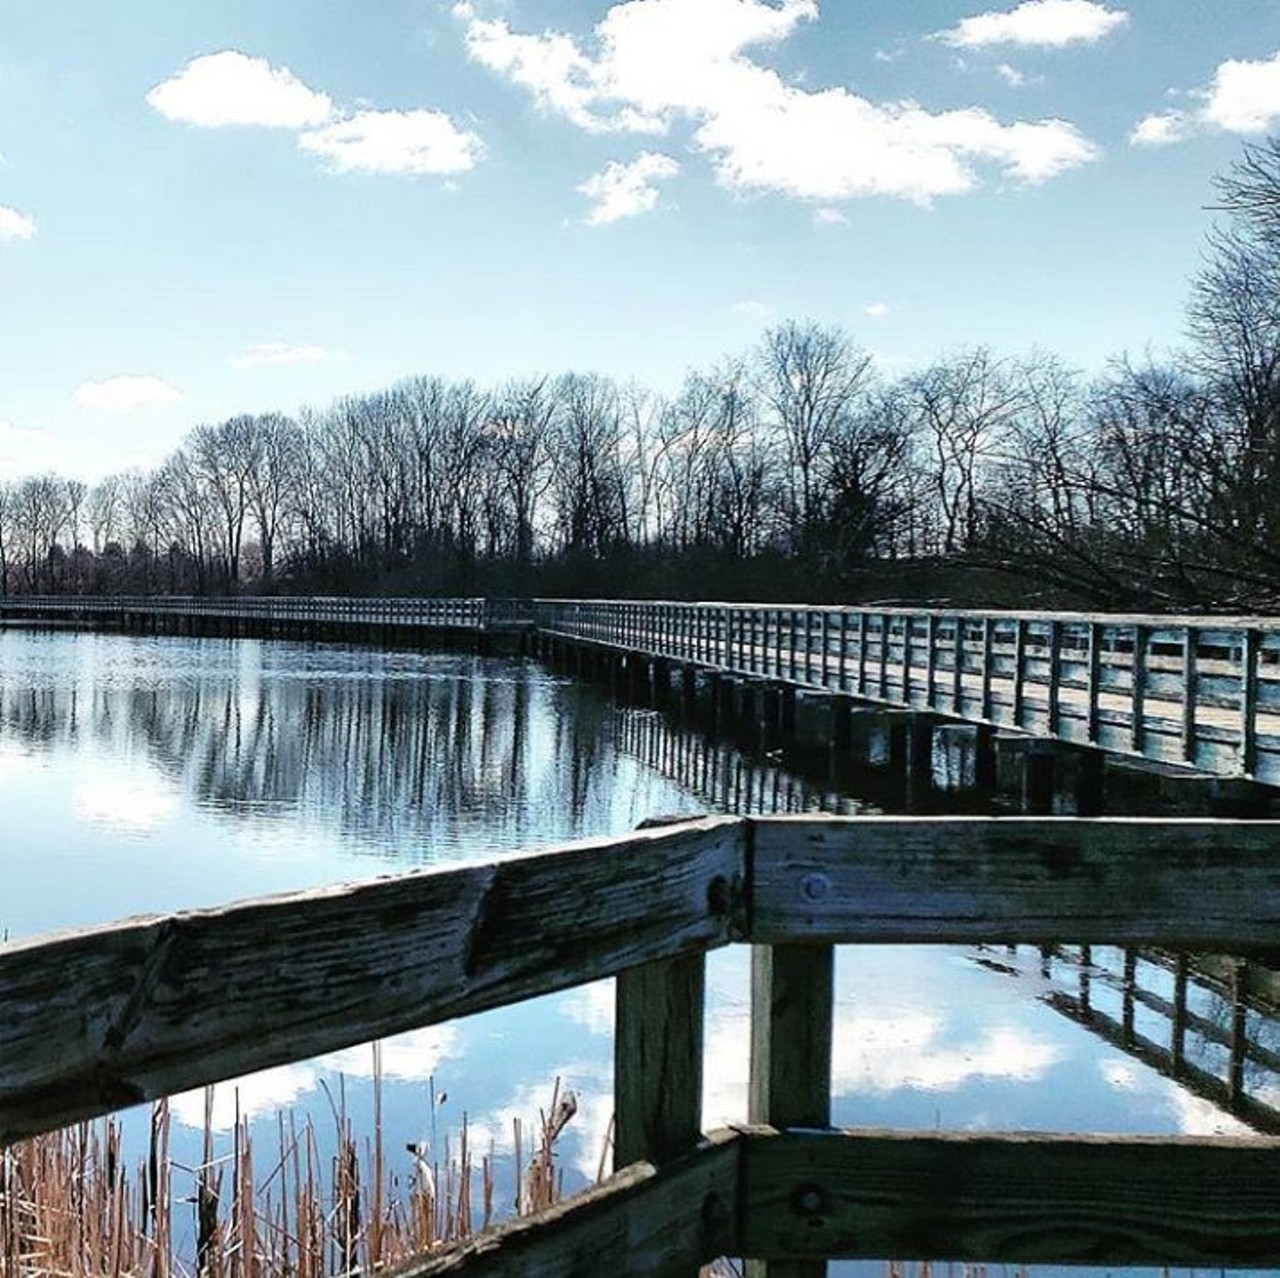 North Bay Trail
Ypsilanti
Good for all things water-related, North Bay Park's trail is super relaxing and leisurely, having water on either side of the loop. The park includes fishing spots and a boardwalk as well.
Photo via Instagram user @christinathetraveler